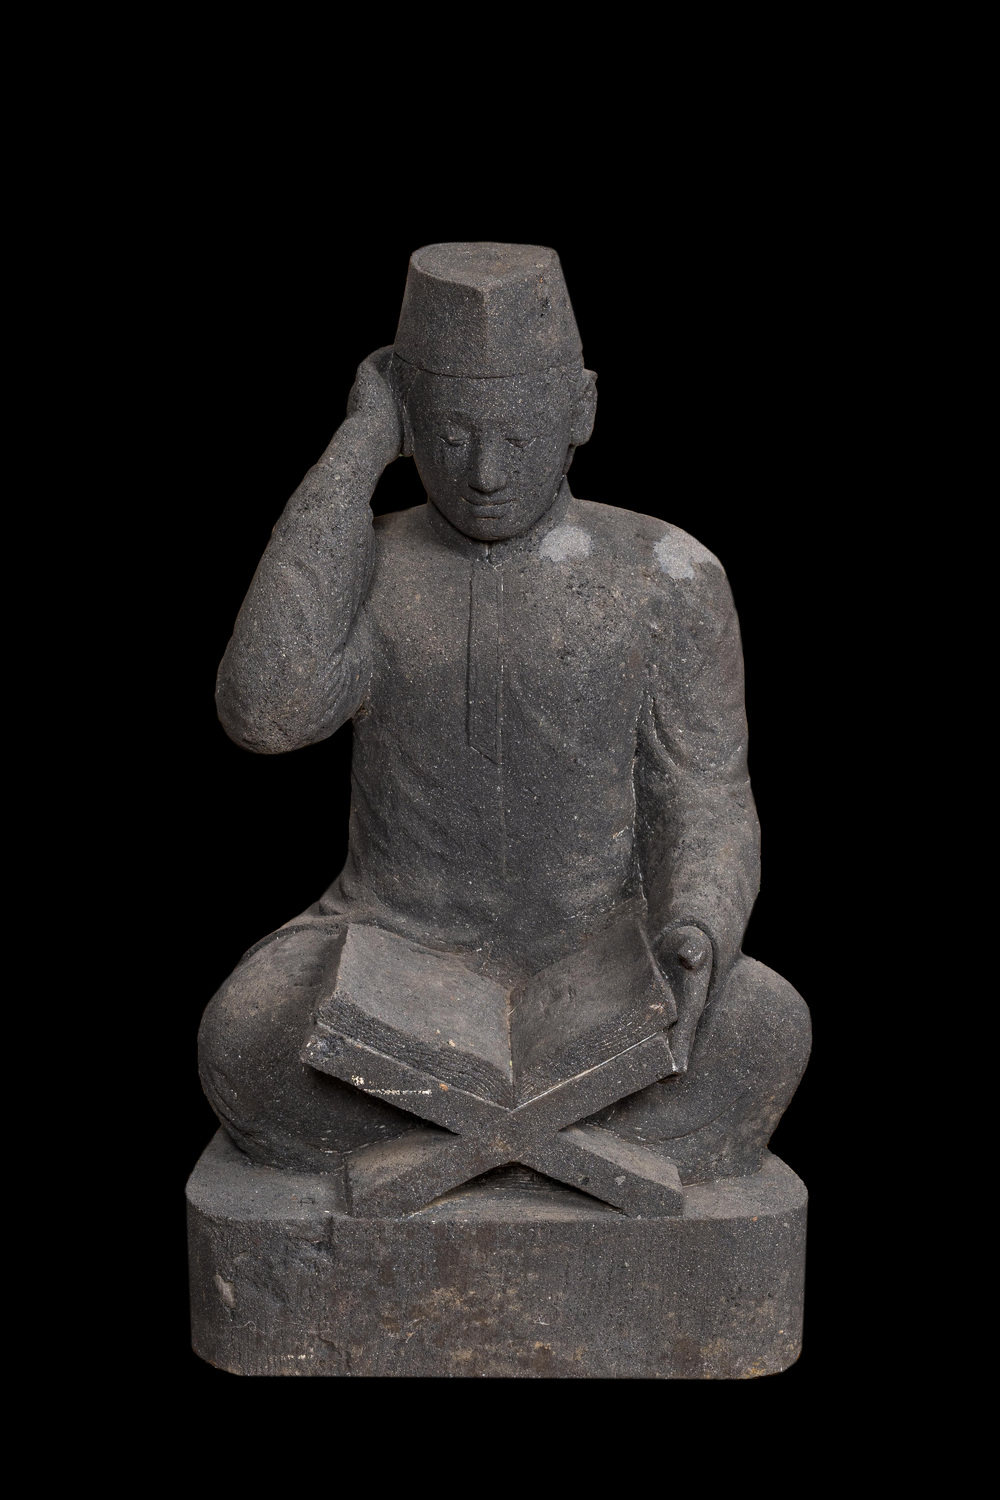 A basalt sculpture of a reading student, Indonesia, 20th C.